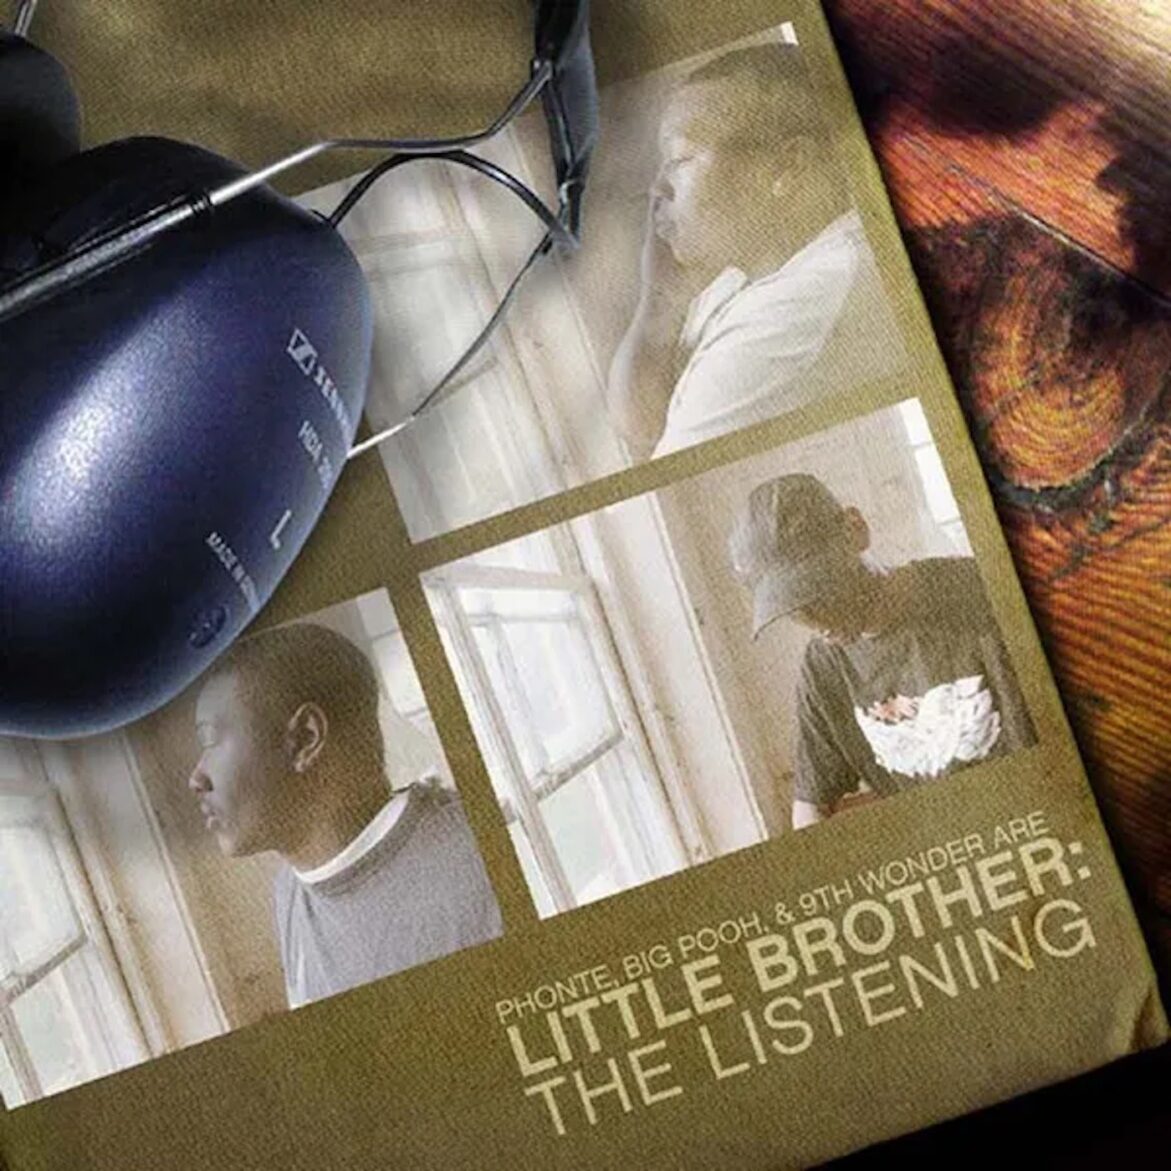 Black Podcasting - Little Brother: The Listening (2003). They Called Next... (feat. Chris "Kinetik" Mitchell)